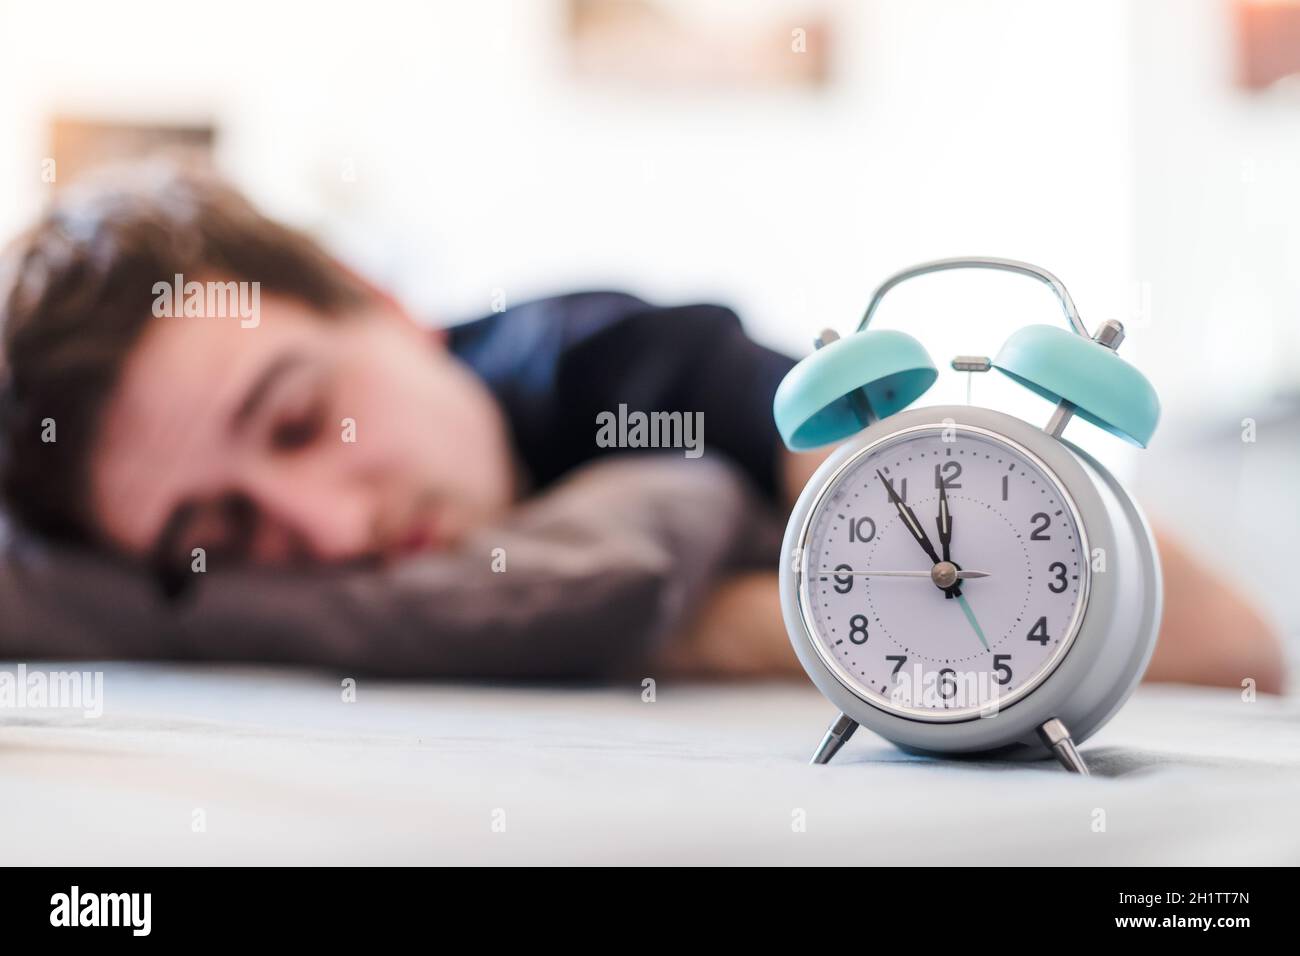 White alarm clock in the morning. Young man sleeps in the background. Stock Photo